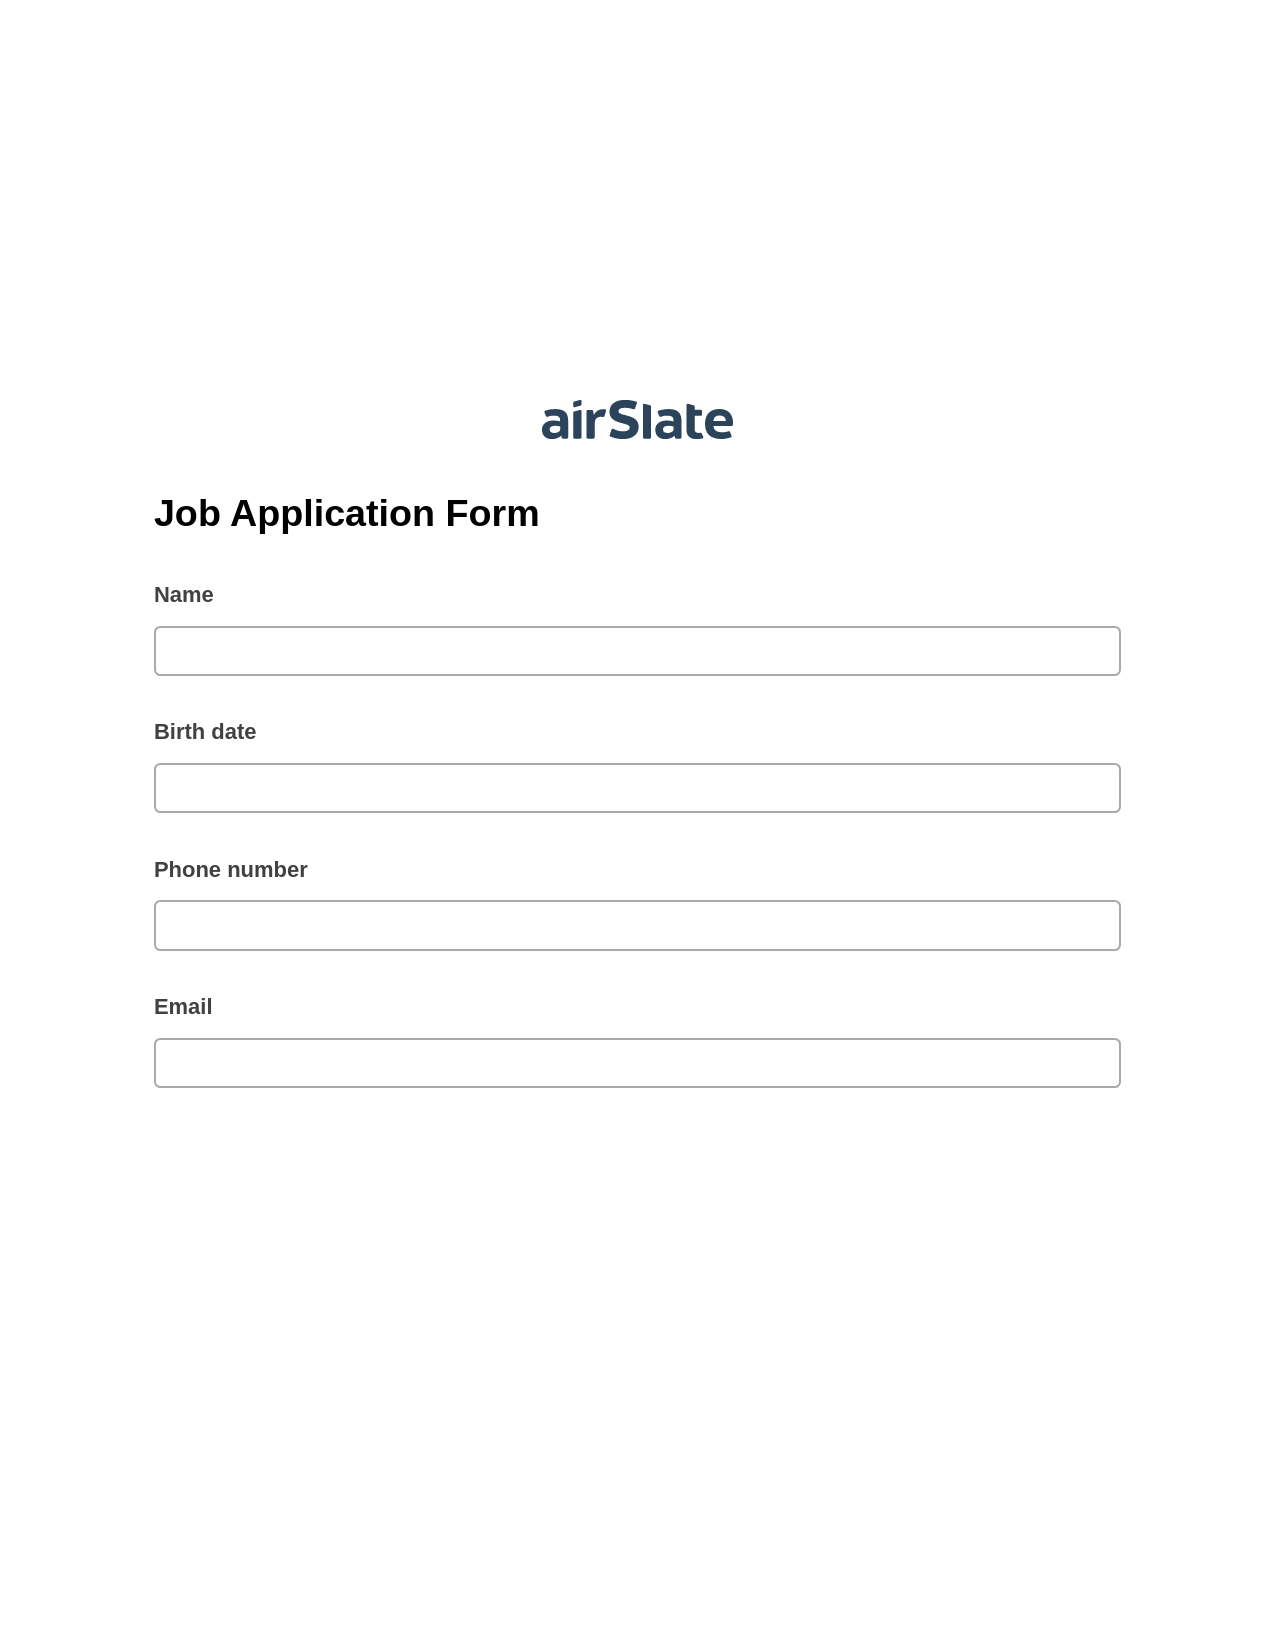 Job Application Form Pre-fill Dropdown from Airtable, Text Message Notification Bot, Dropbox Bot